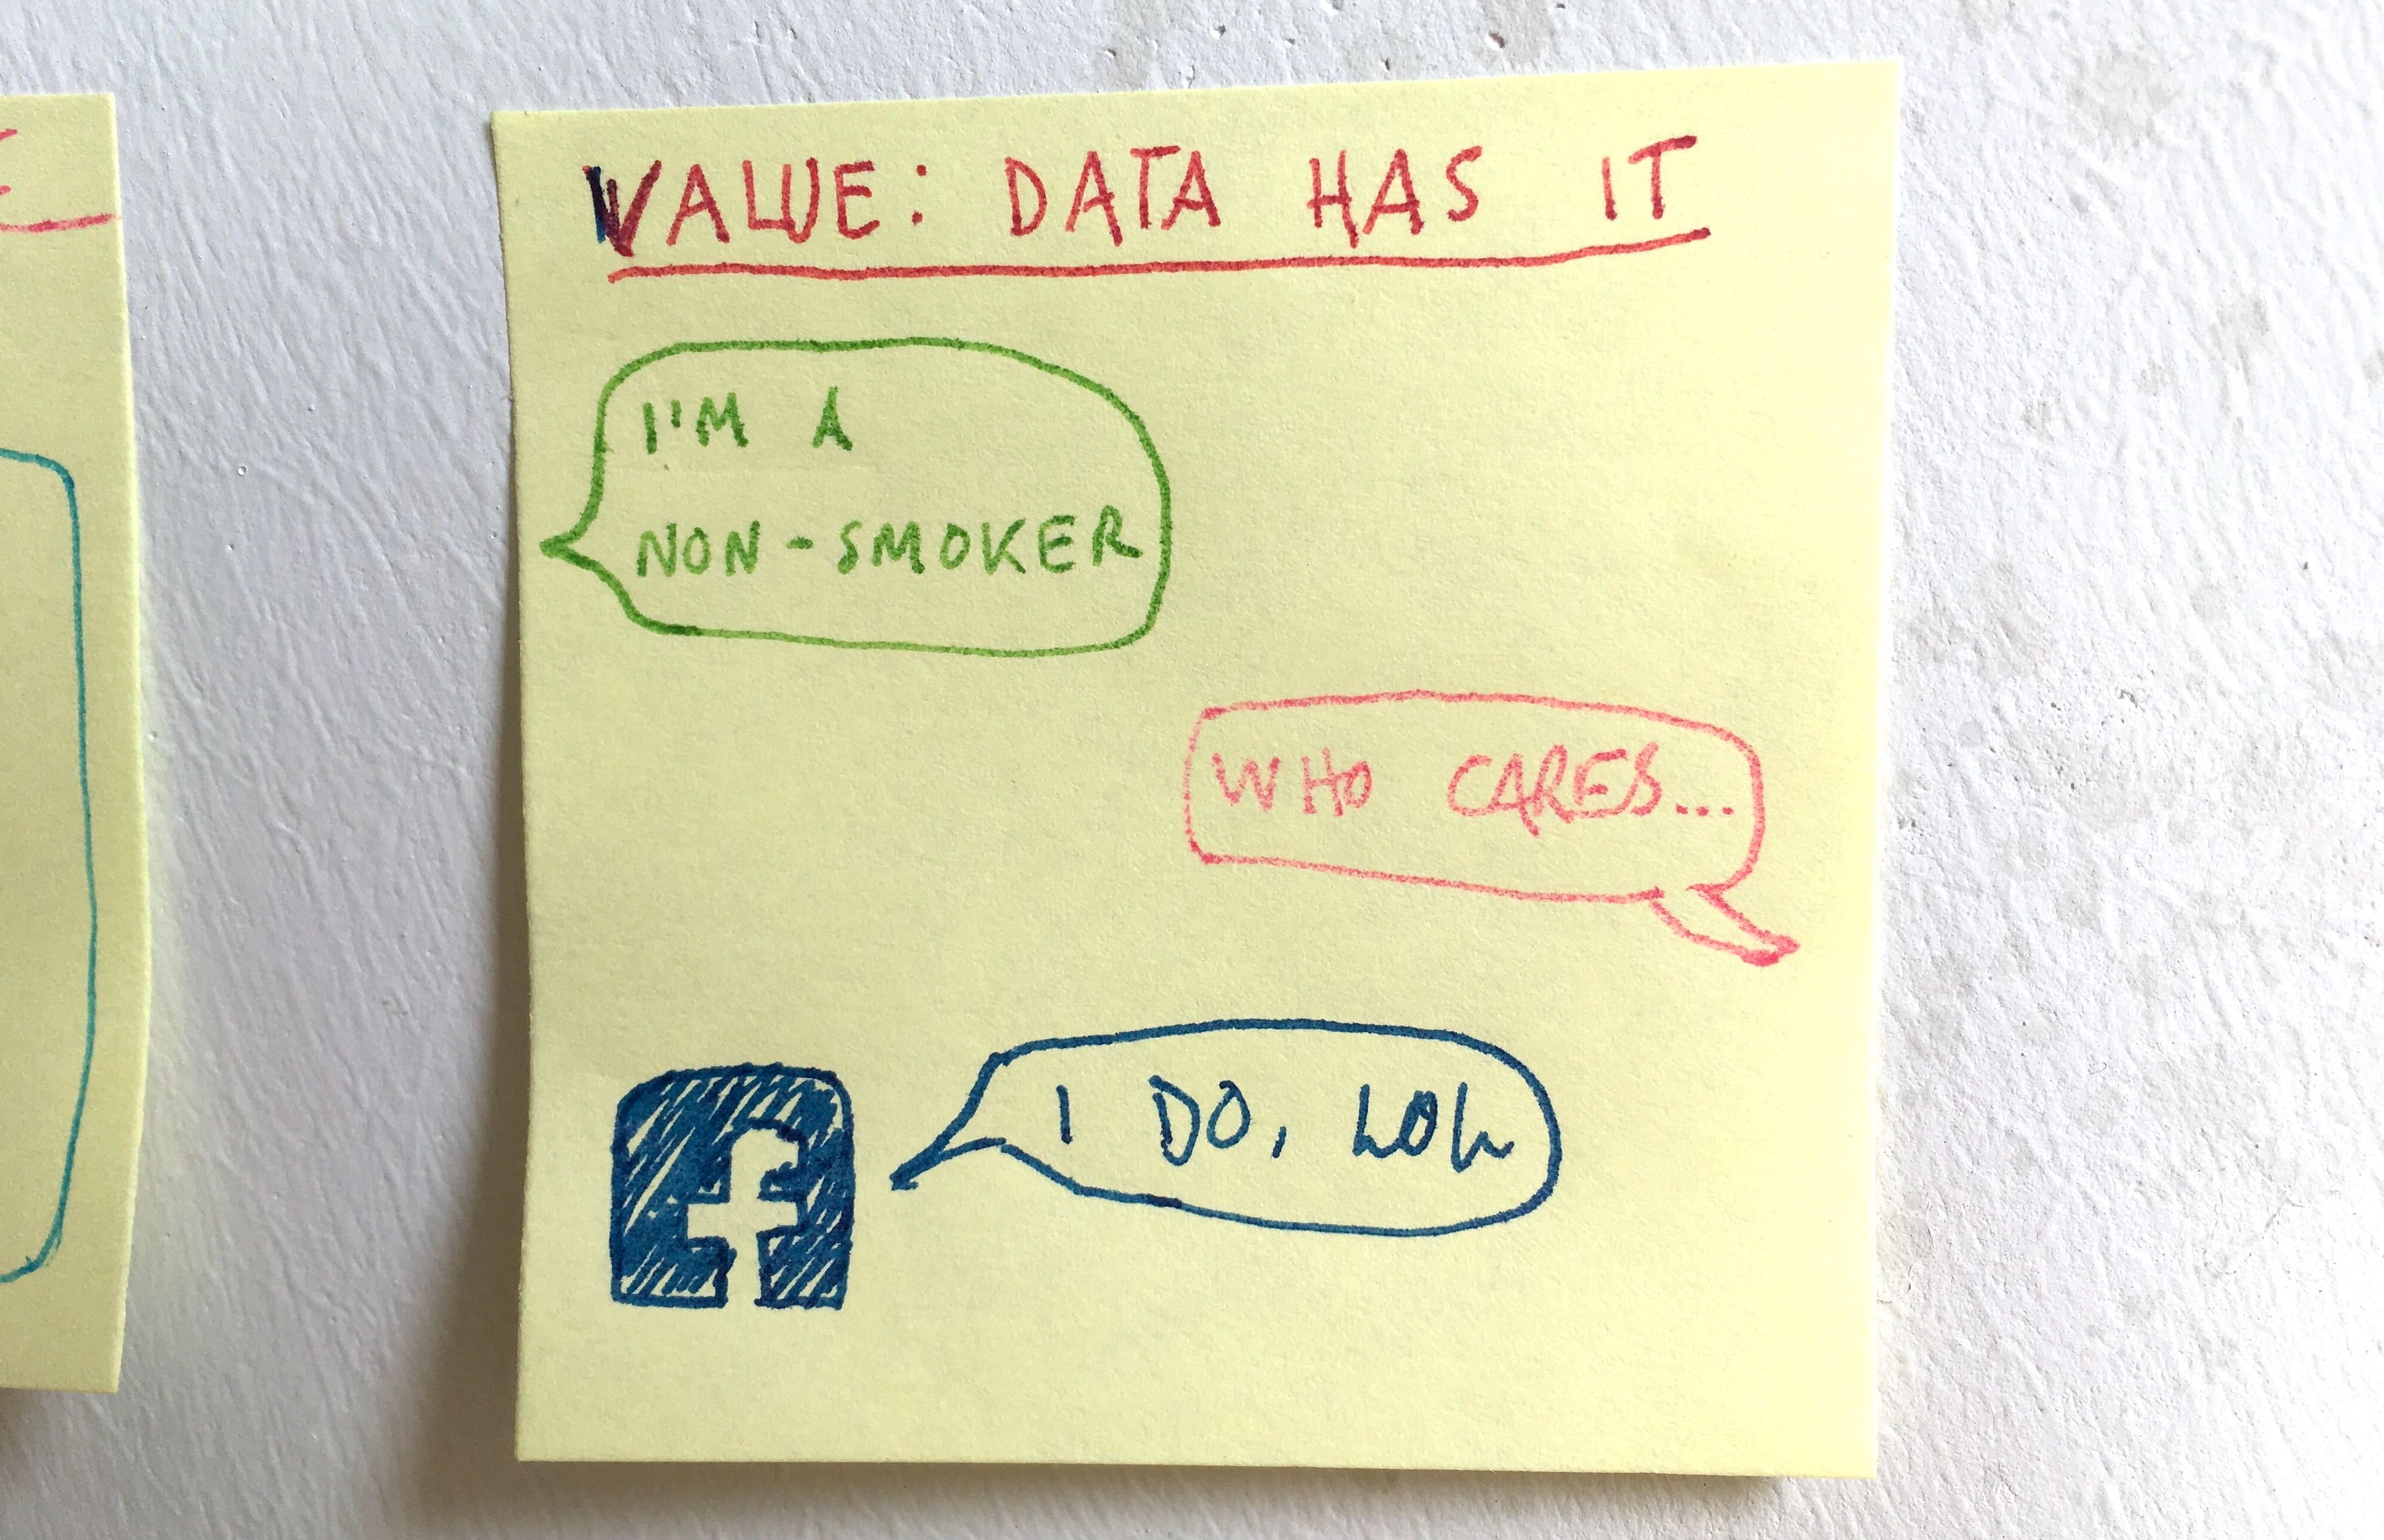 image showing that Facebook uses data as a valuable resource